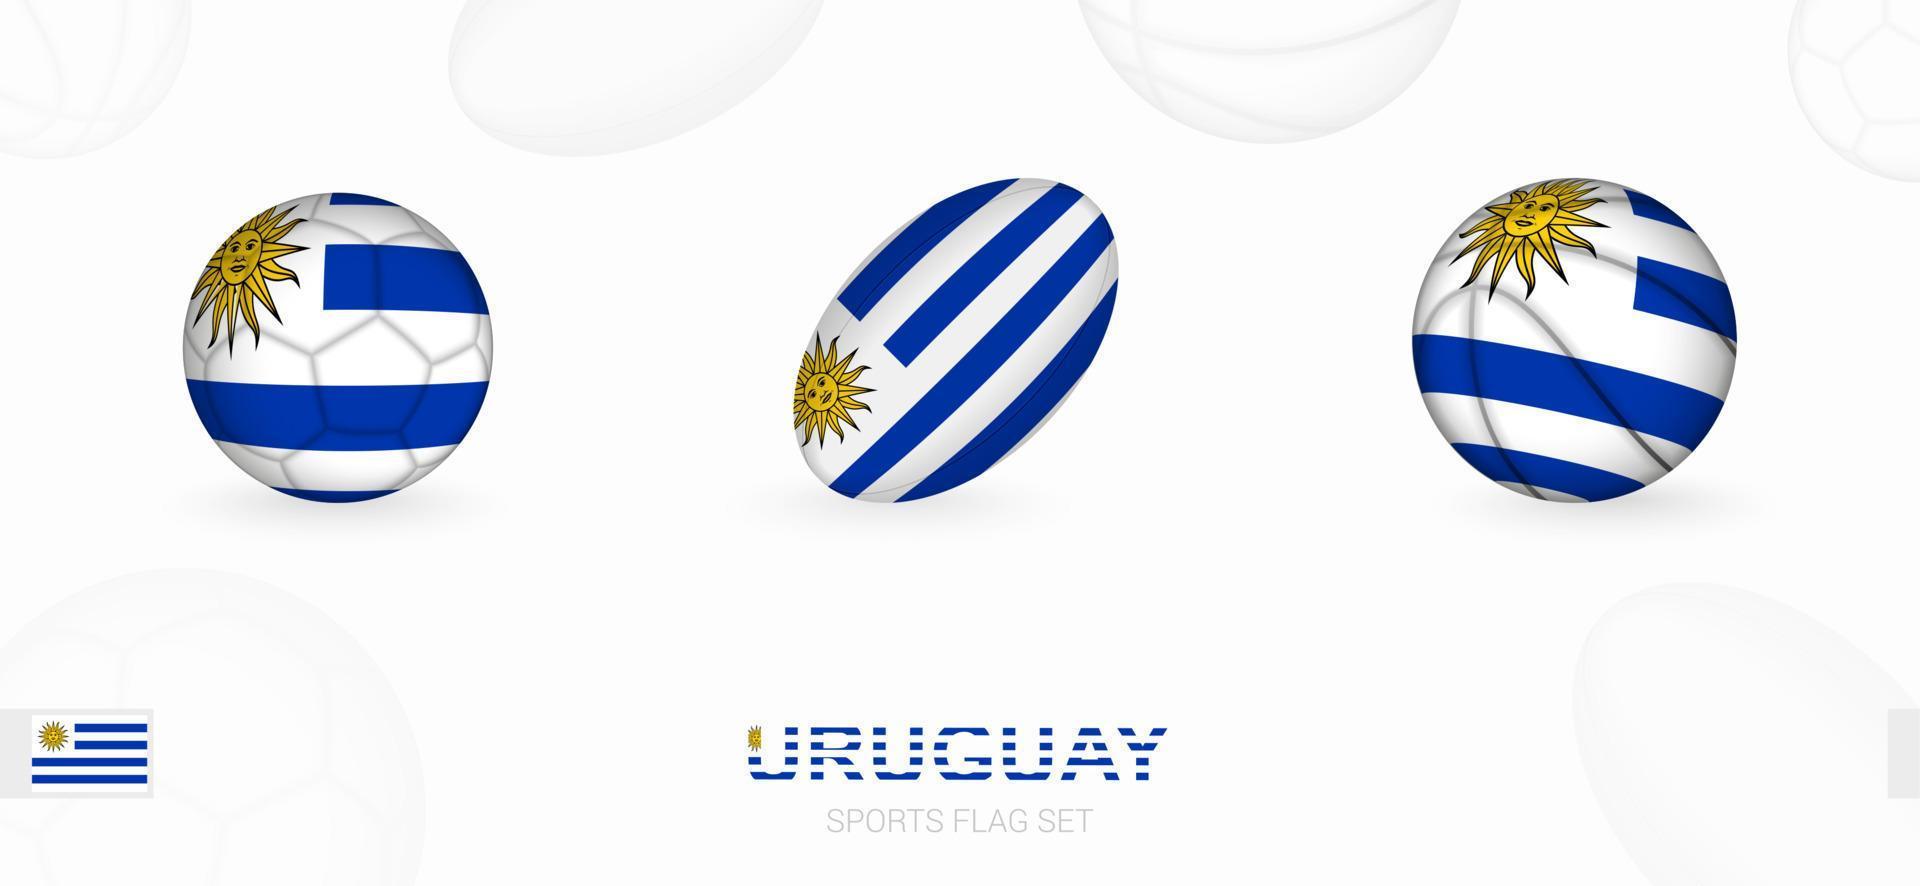 Sports icons for football, rugby and basketball with the flag of Uruguay. vector